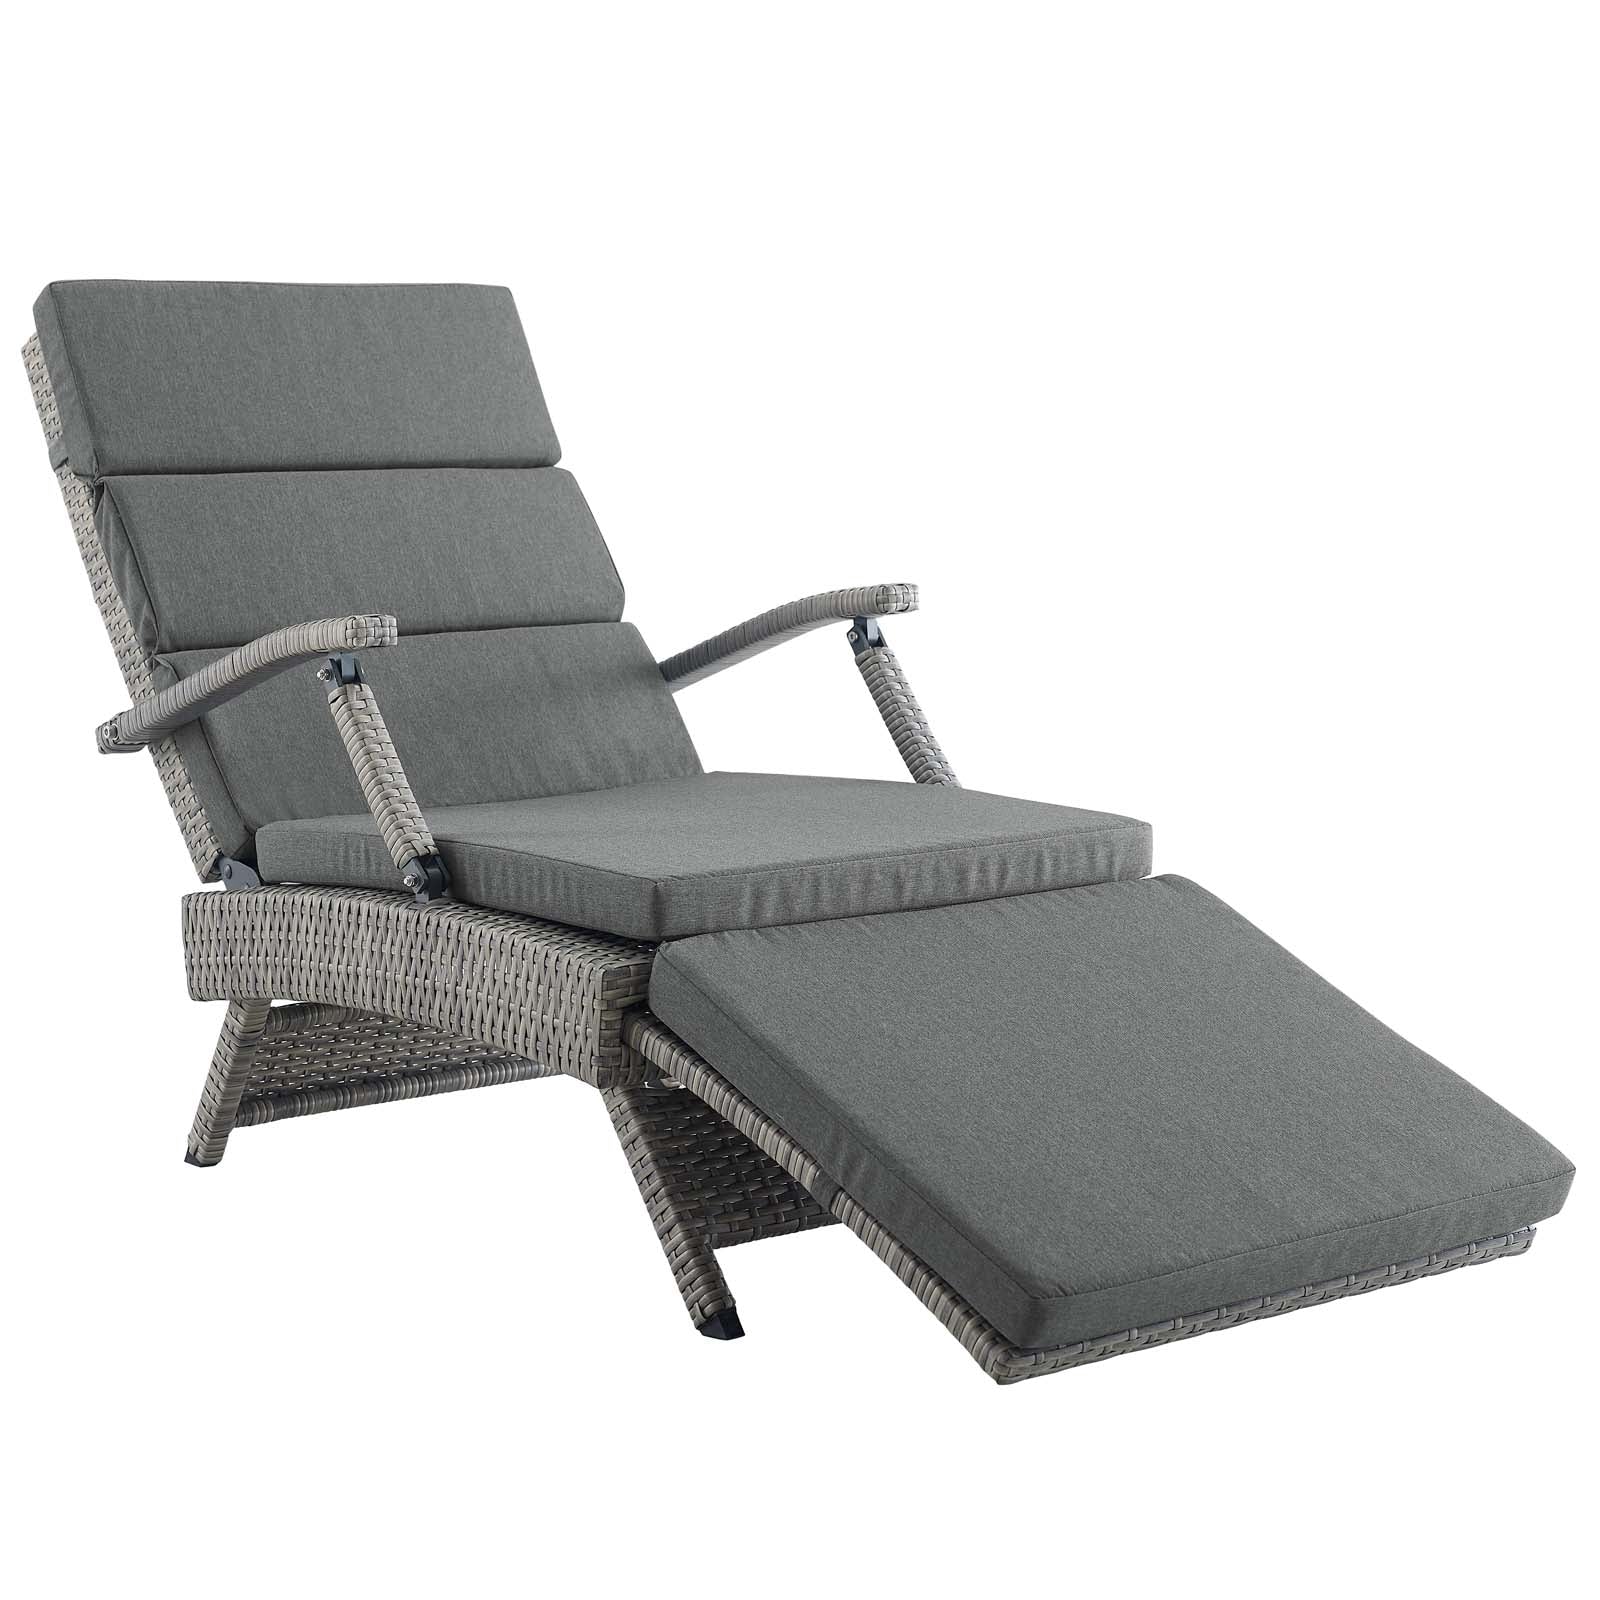 Modway Outdoor Loungers - Envisage Chaise Outdoor Lounge Chair Light Gray & Charcoal